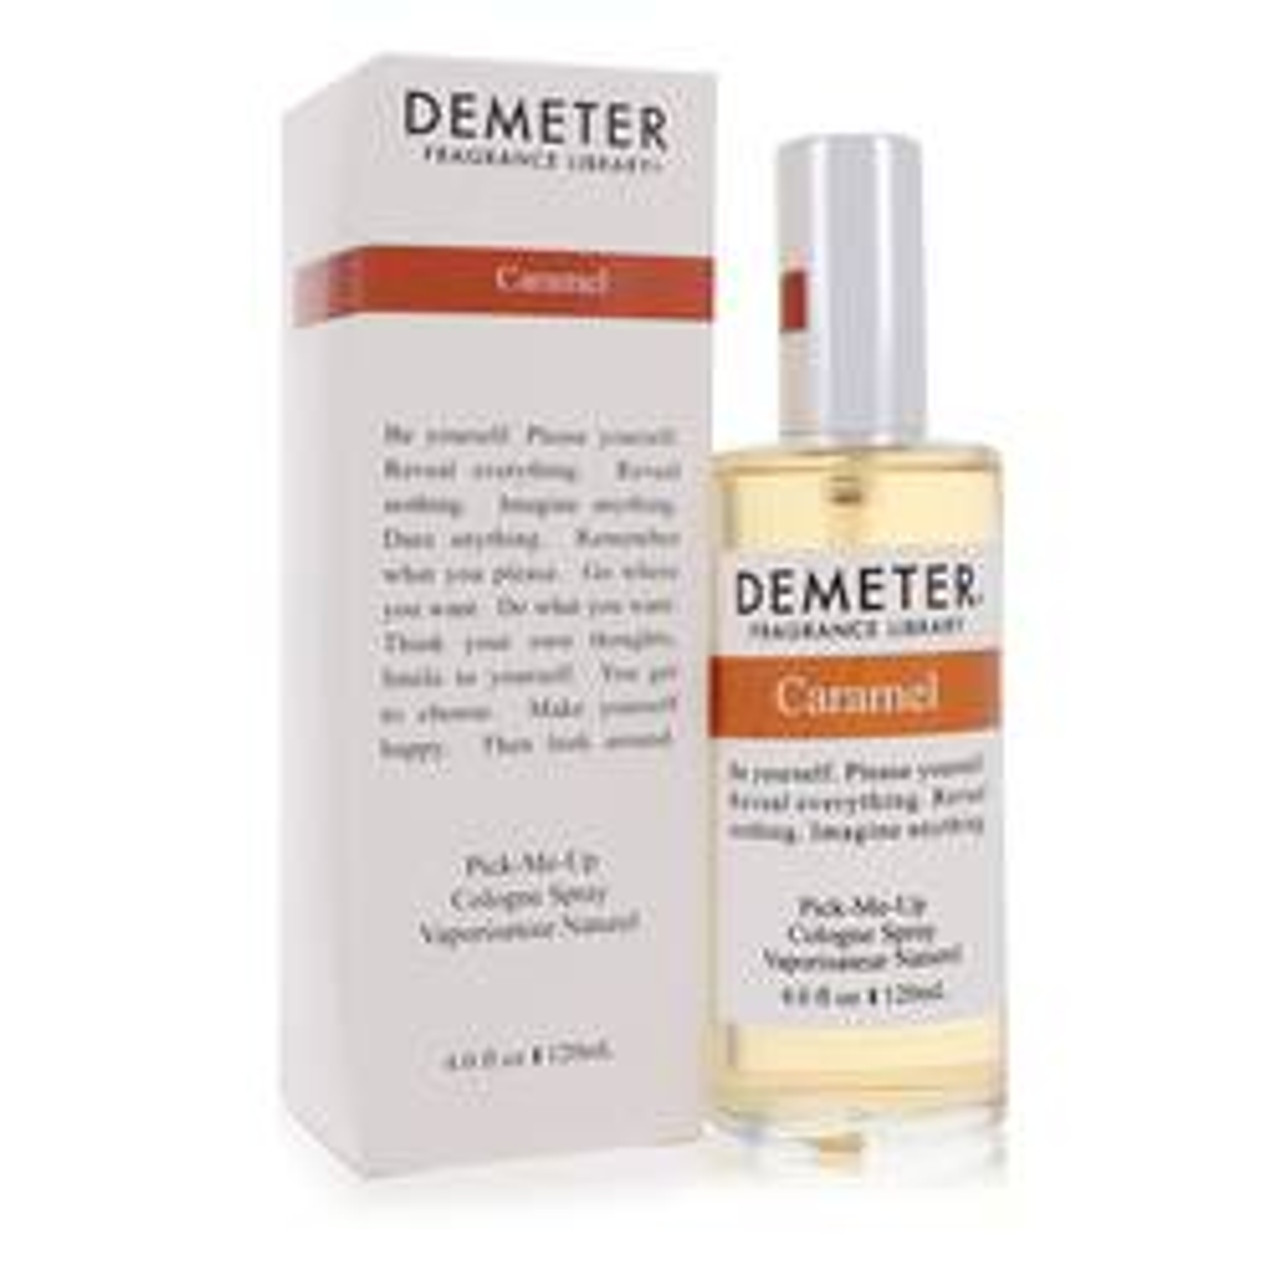 Demeter Caramel Perfume By Demeter Cologne Spray 4 oz for Women - [From 79.50 - Choose pk Qty ] - *Ships from Miami